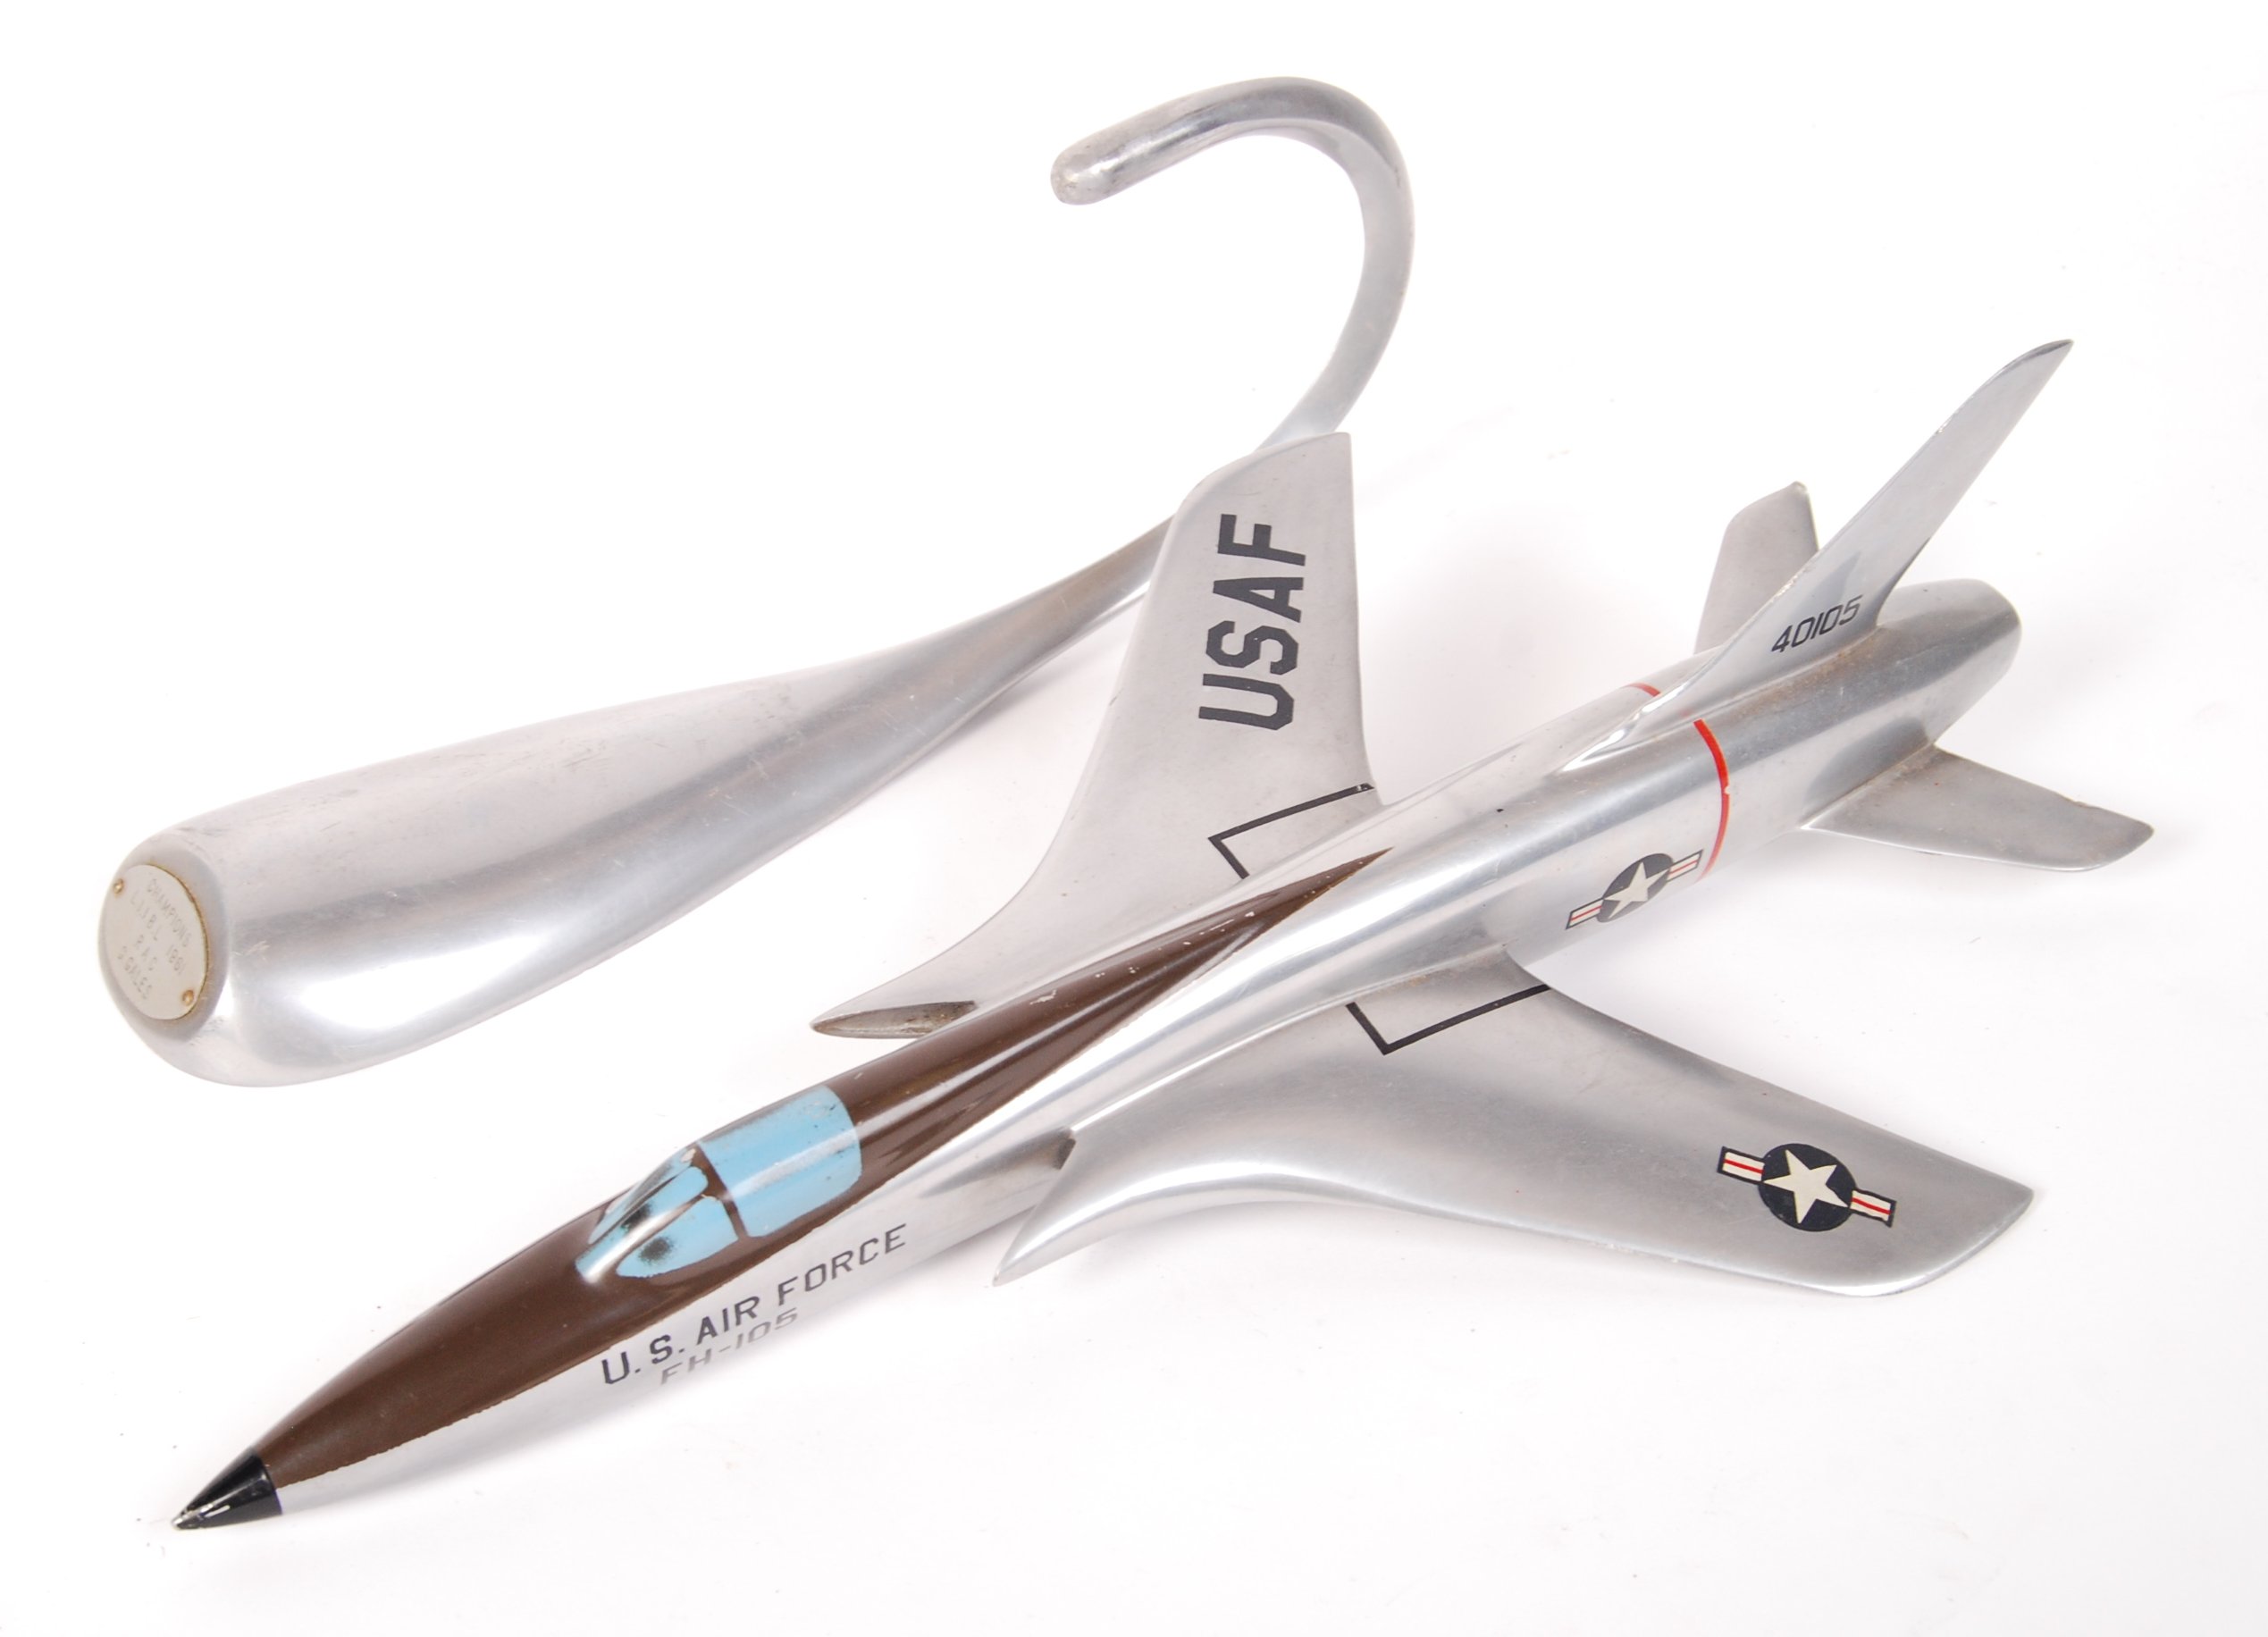 ALUMINIUM SCALE MODEL OF A 40105/FH-105 US AIR FORCE JET - Image 4 of 4